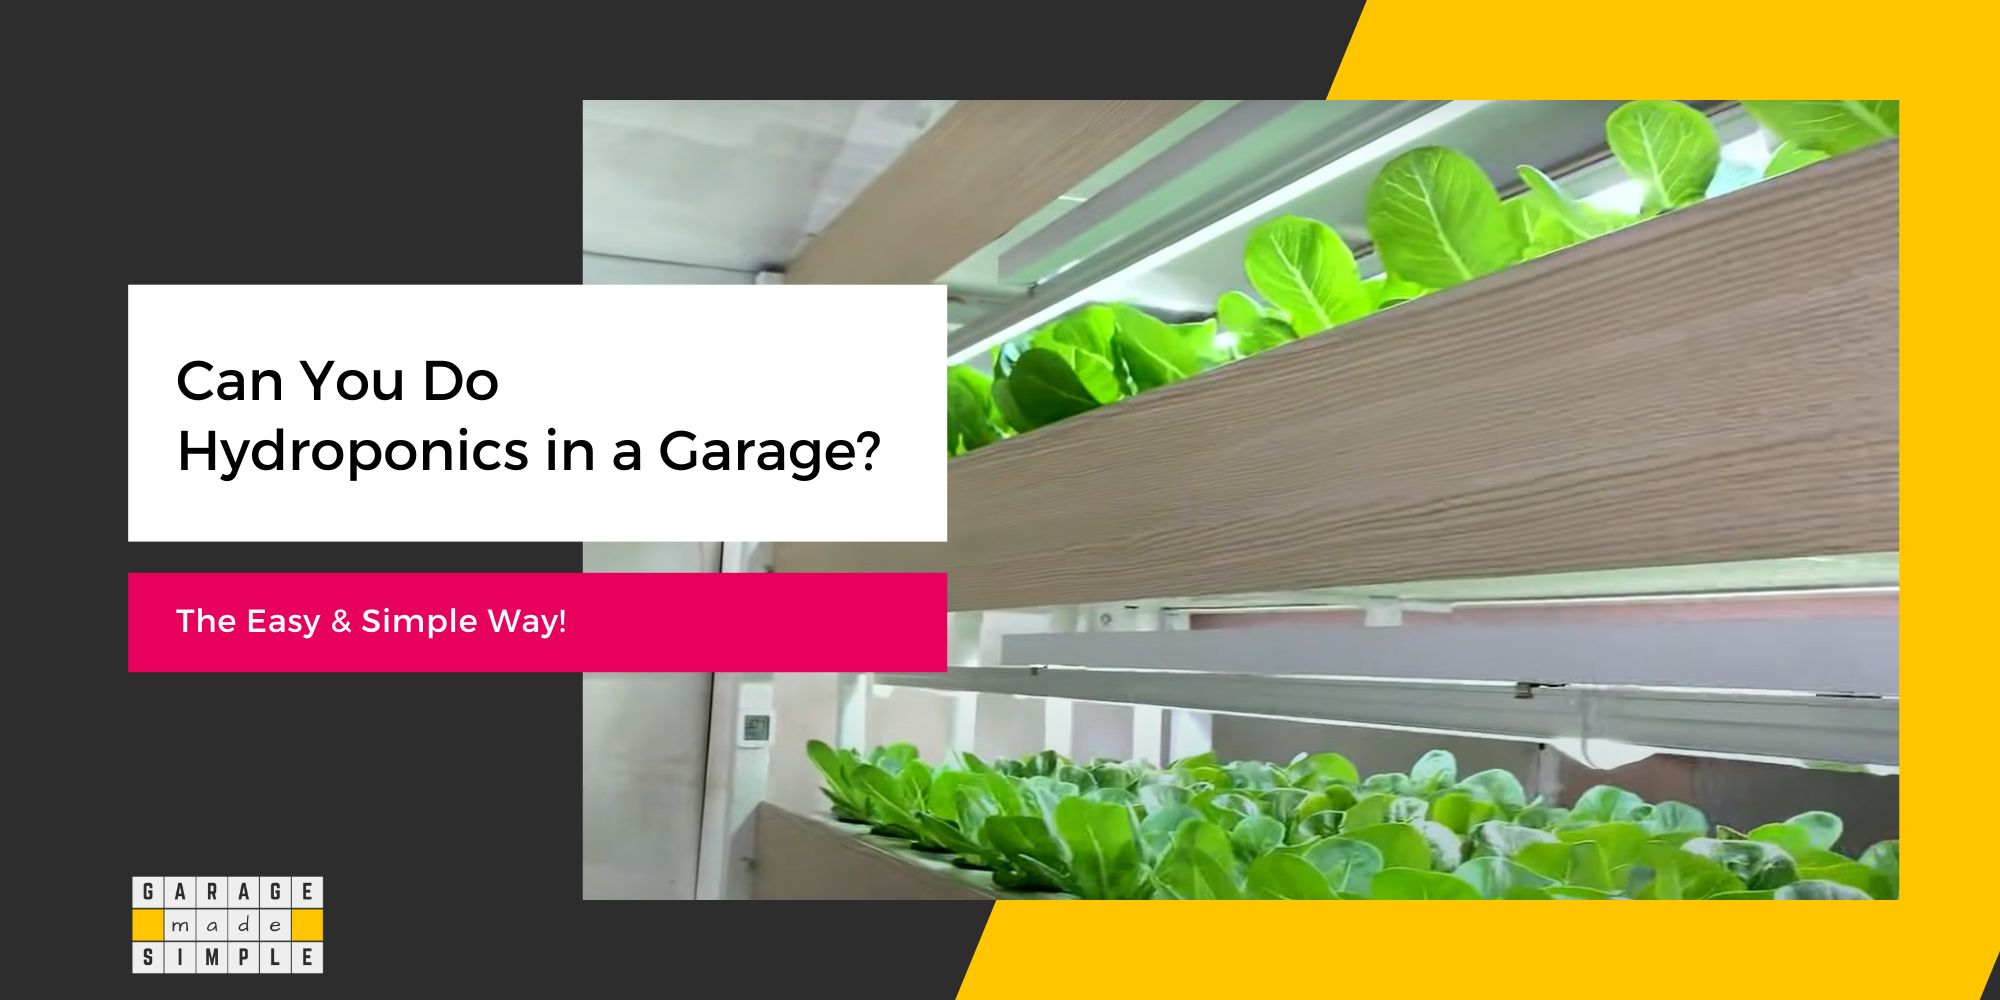 Can You Do Hydroponics in a Garage?